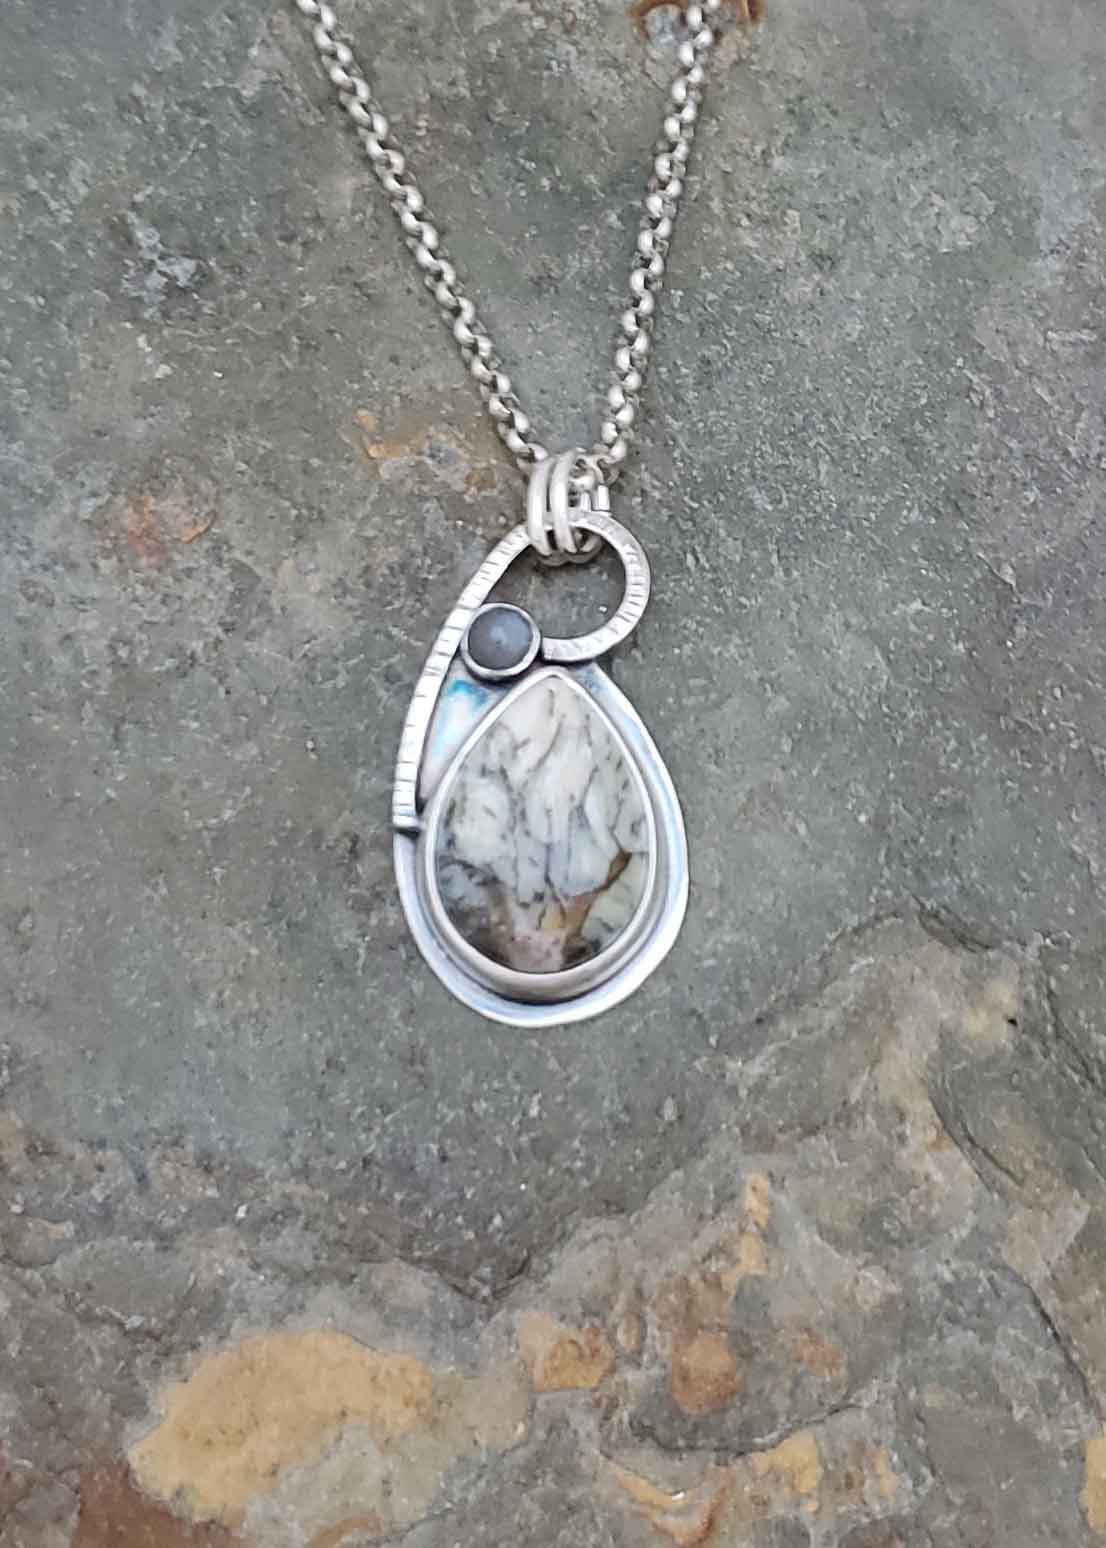 In the Mist - grays and brown Merlinite and silver moonstone pendant.